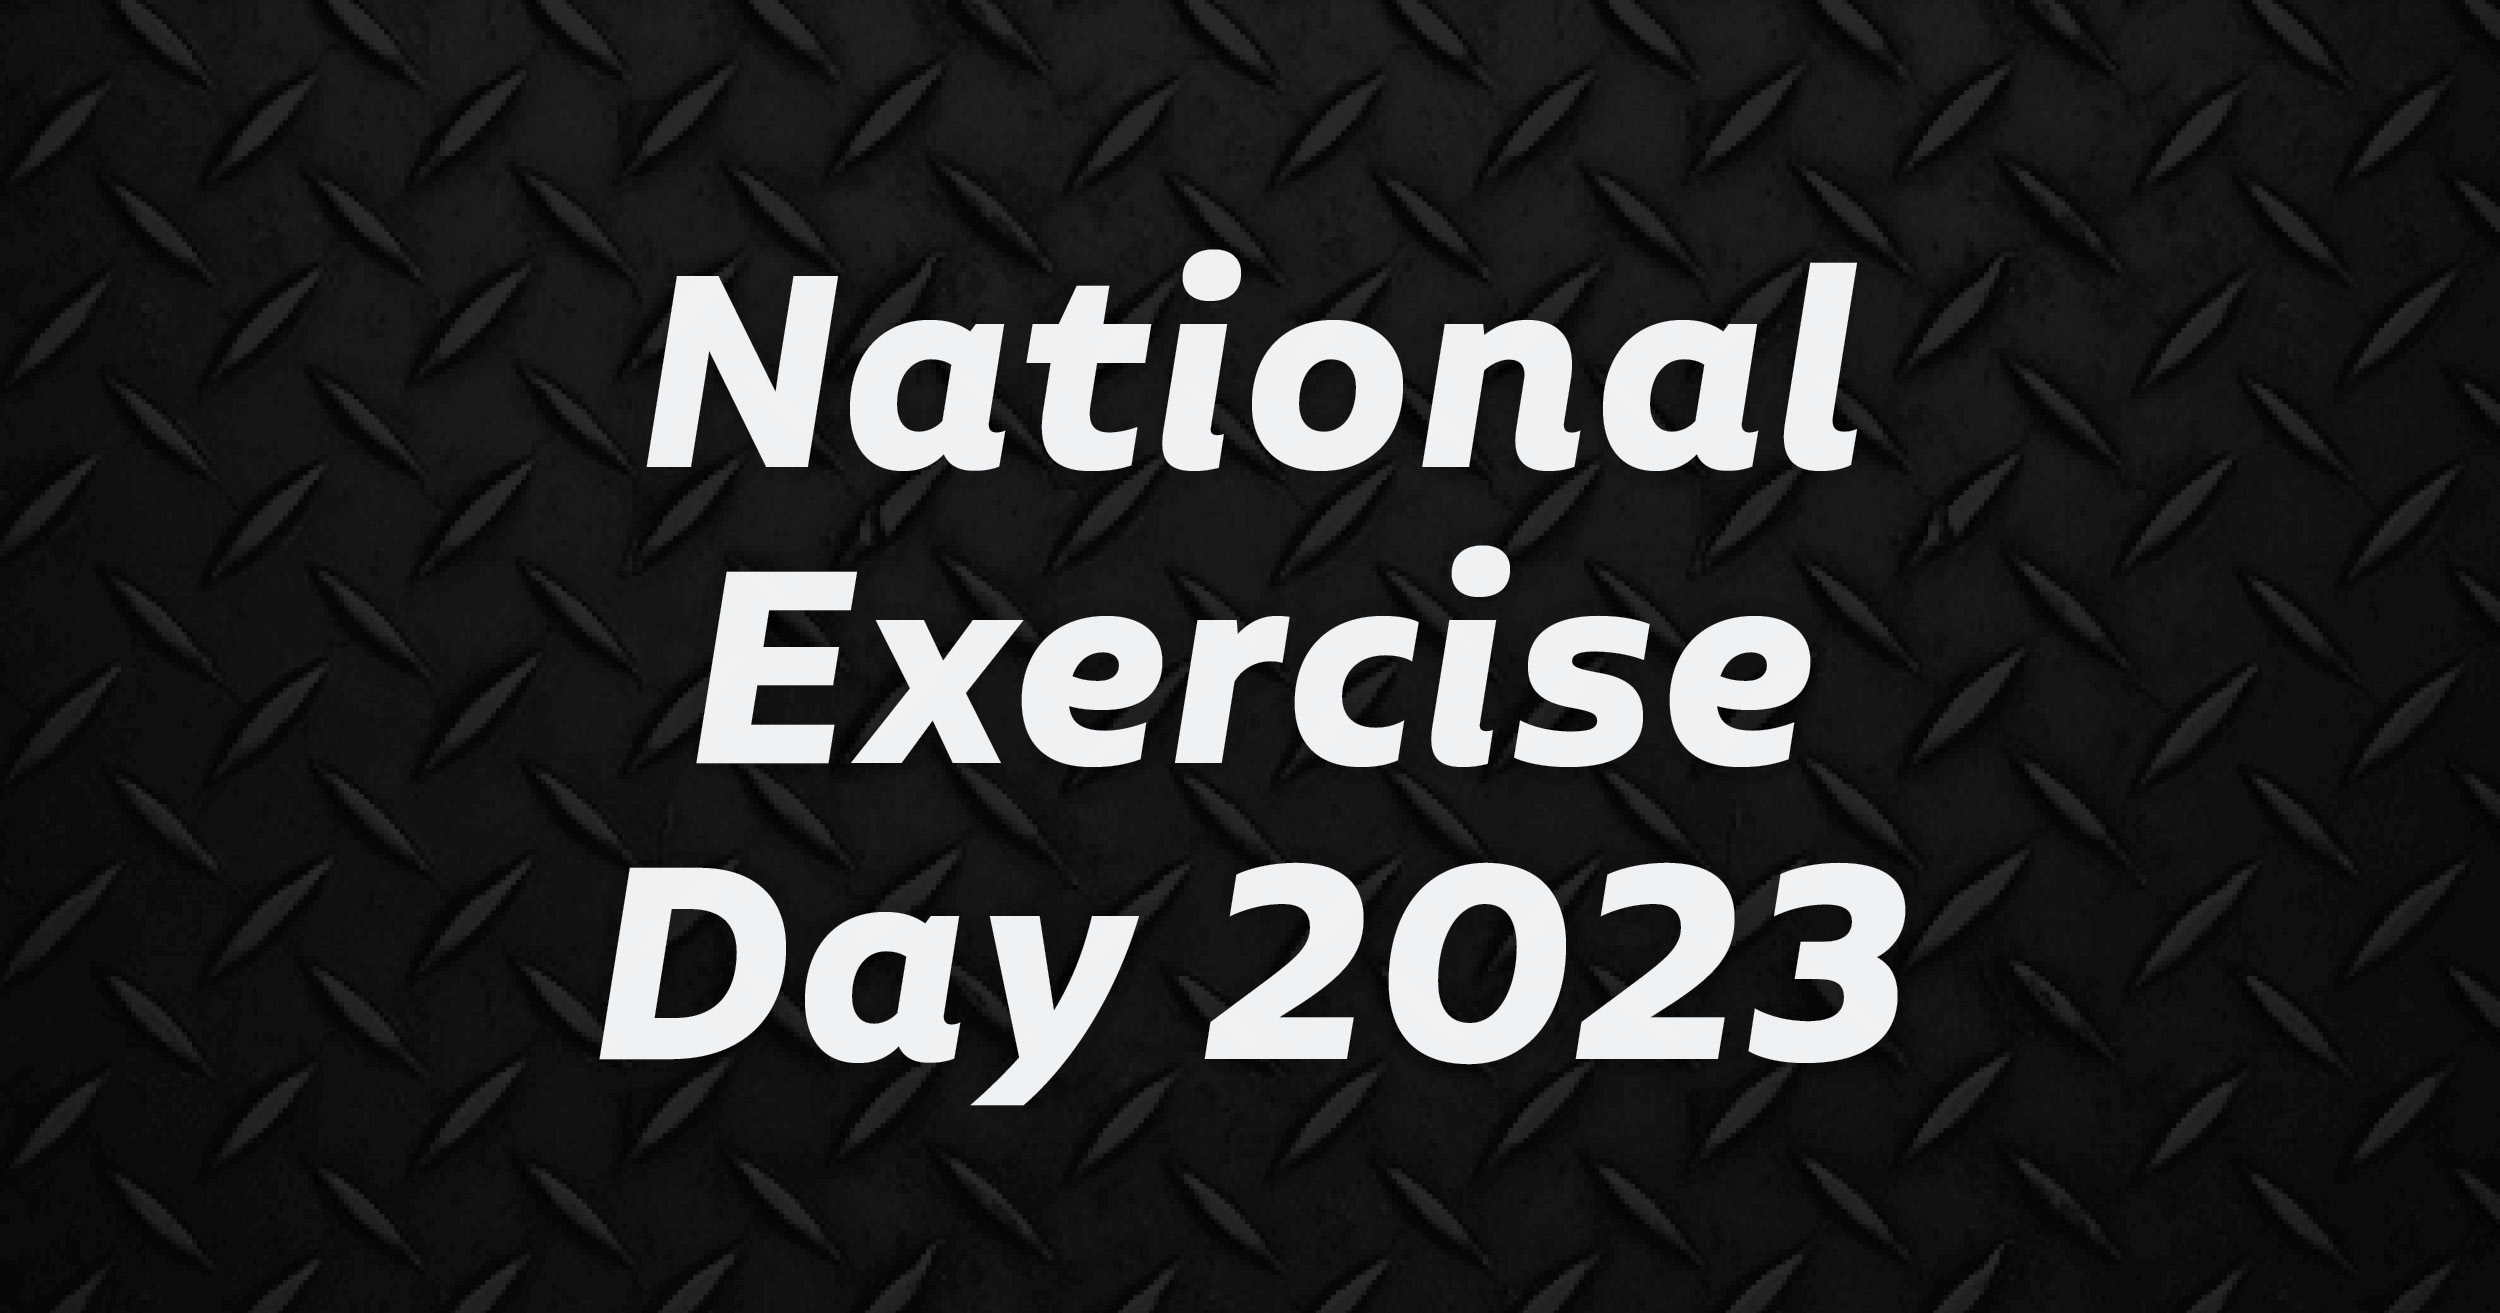 National Exercise Day